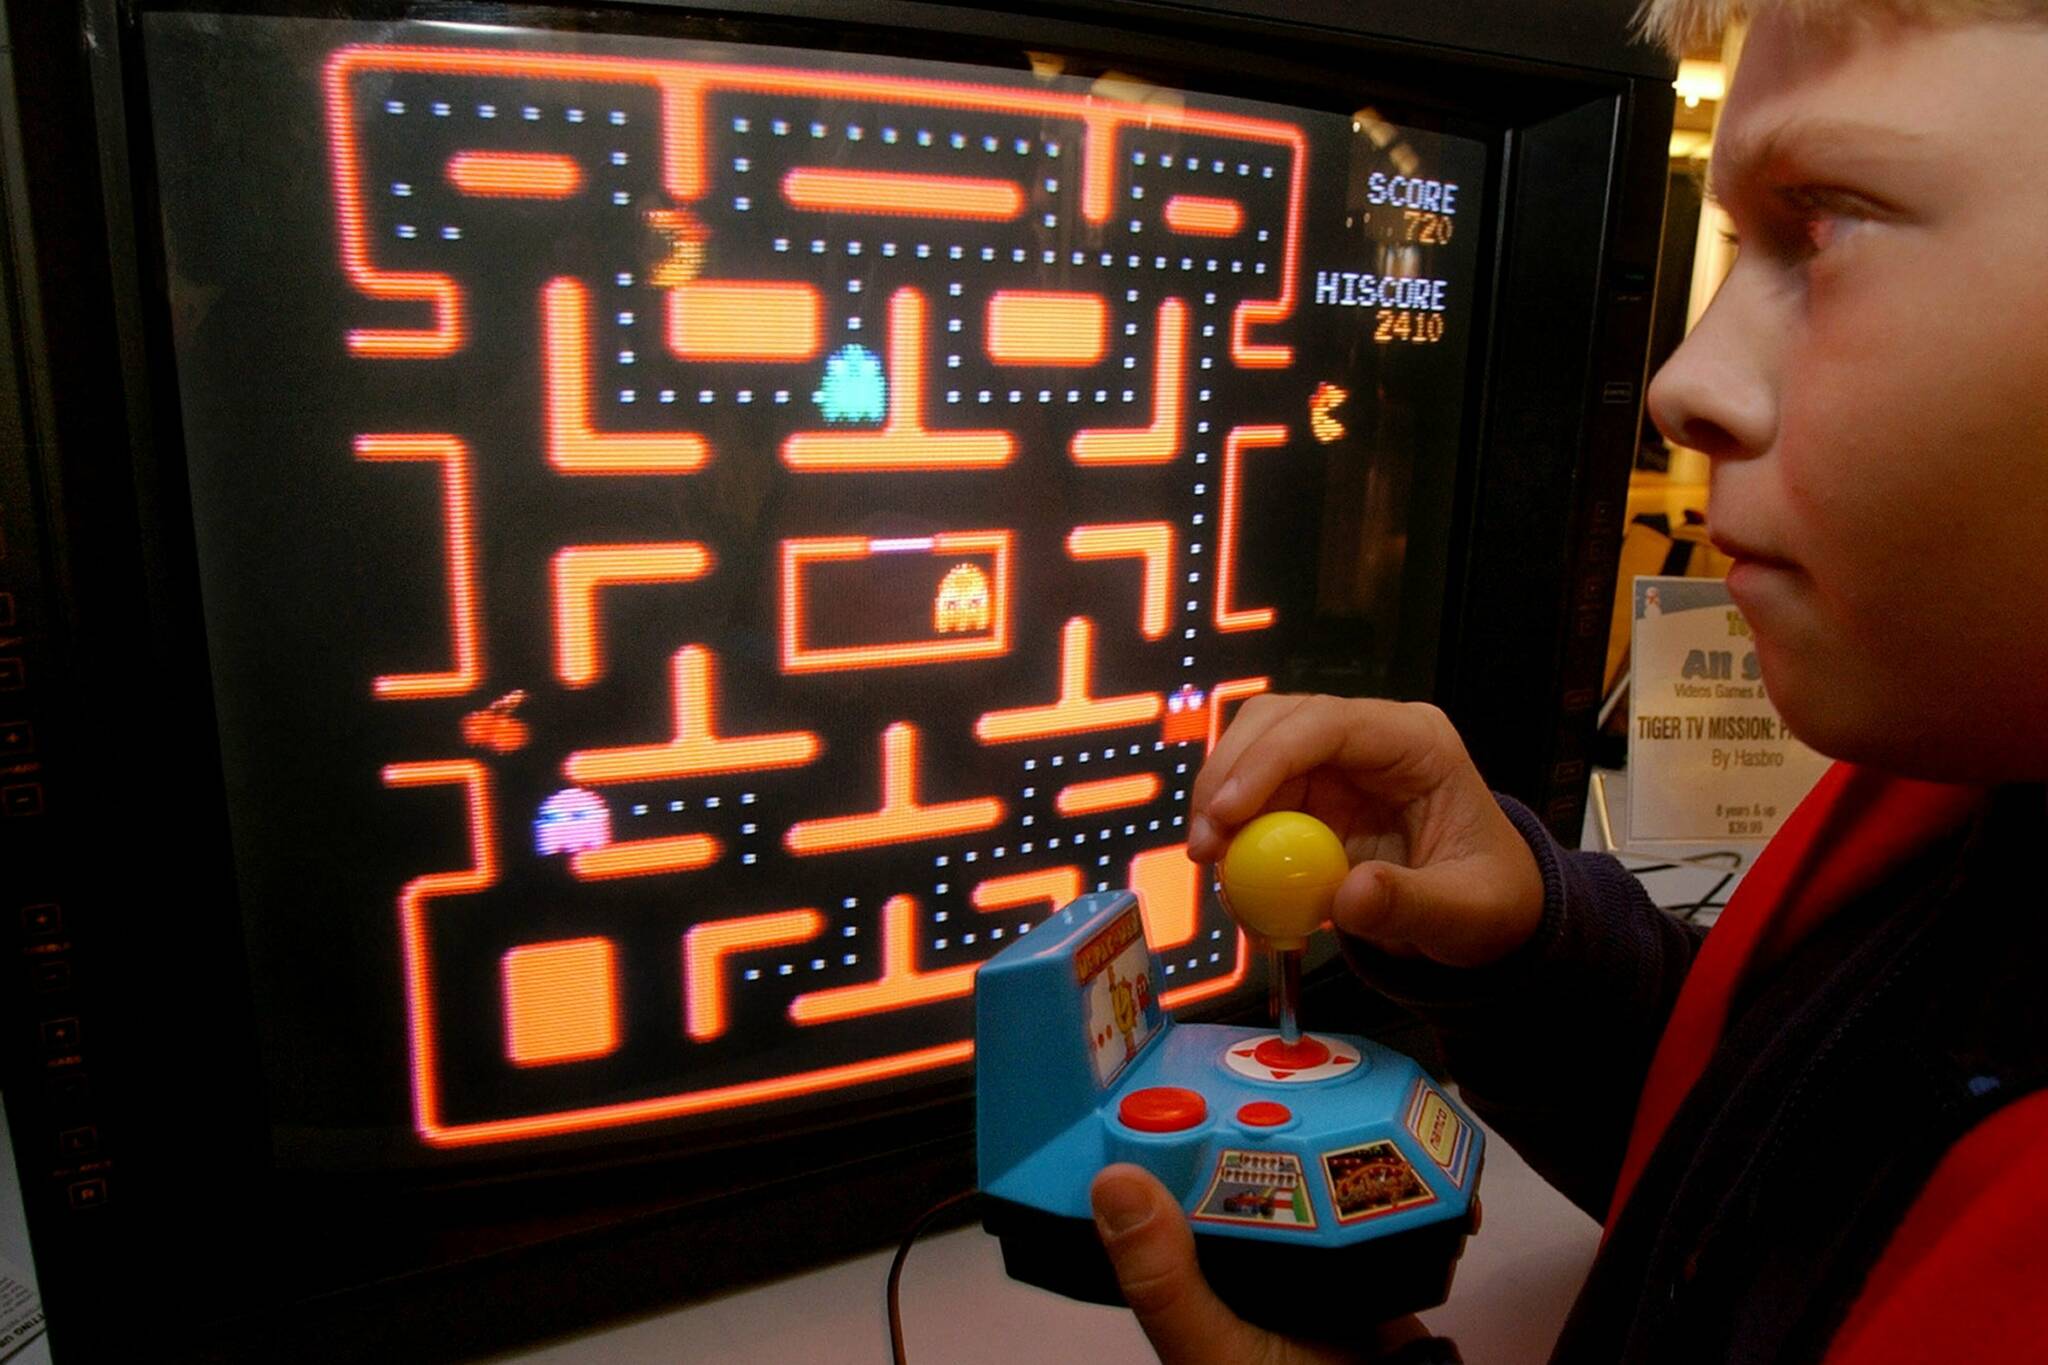 FILE - In this Oct. 5, 2004, file photo, Jake Gautney, 12, of Chappaqua, N.Y., tries a Ms. Pac-Man game at the Toy Industry Association holiday preview in New York. Masaya Nakamura, the “Father of Pac-Man” who founded the Japanese video game company behind the hit creature-gobbling game, died on Jan. 22, 2017. He was 91. (AP Photo/Richard Drew, File)